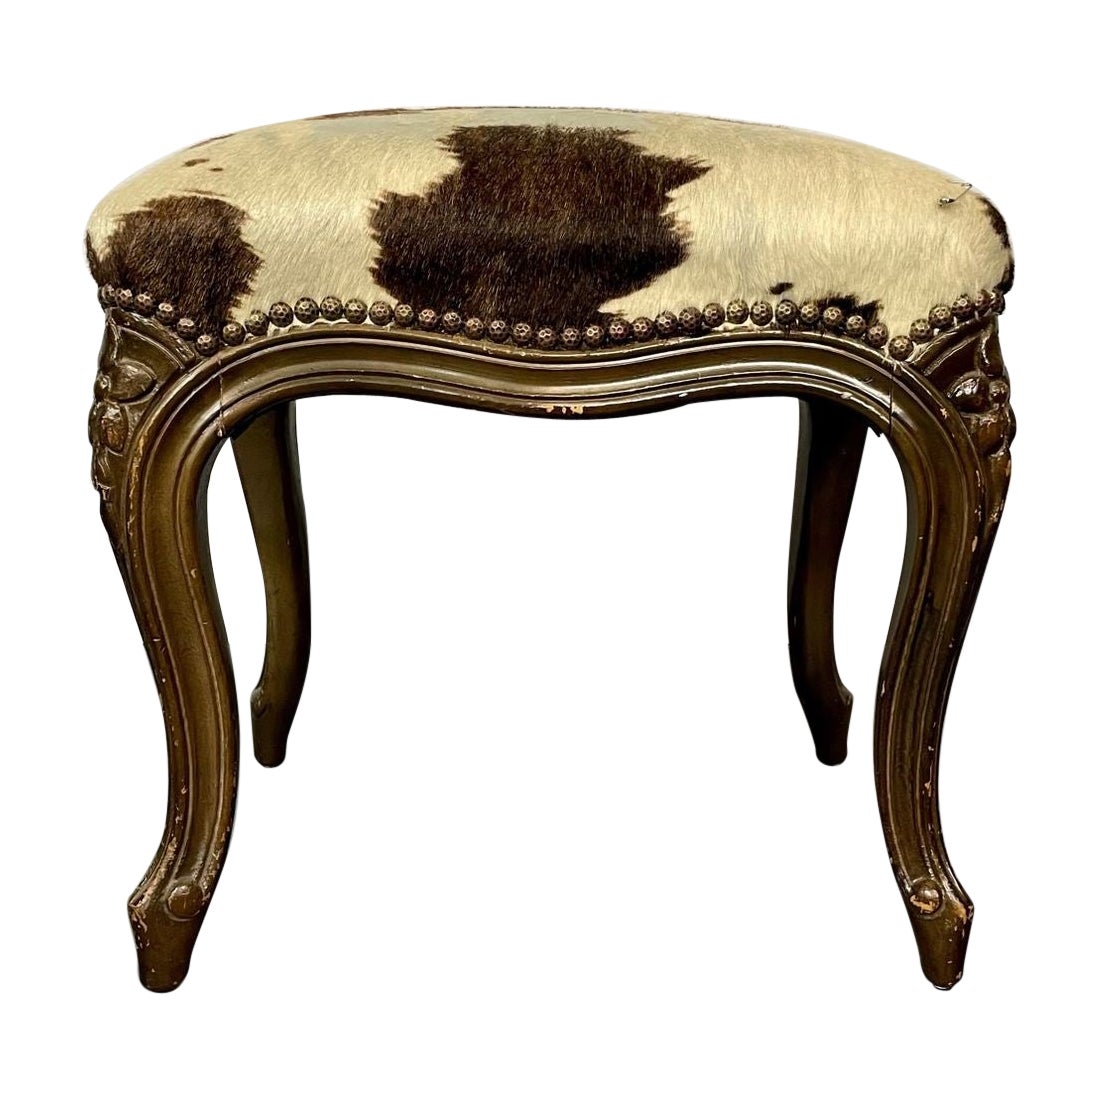 Pony Skin Upholstered, Bench or Foot Stool with Brass Tack Detailing For Sale